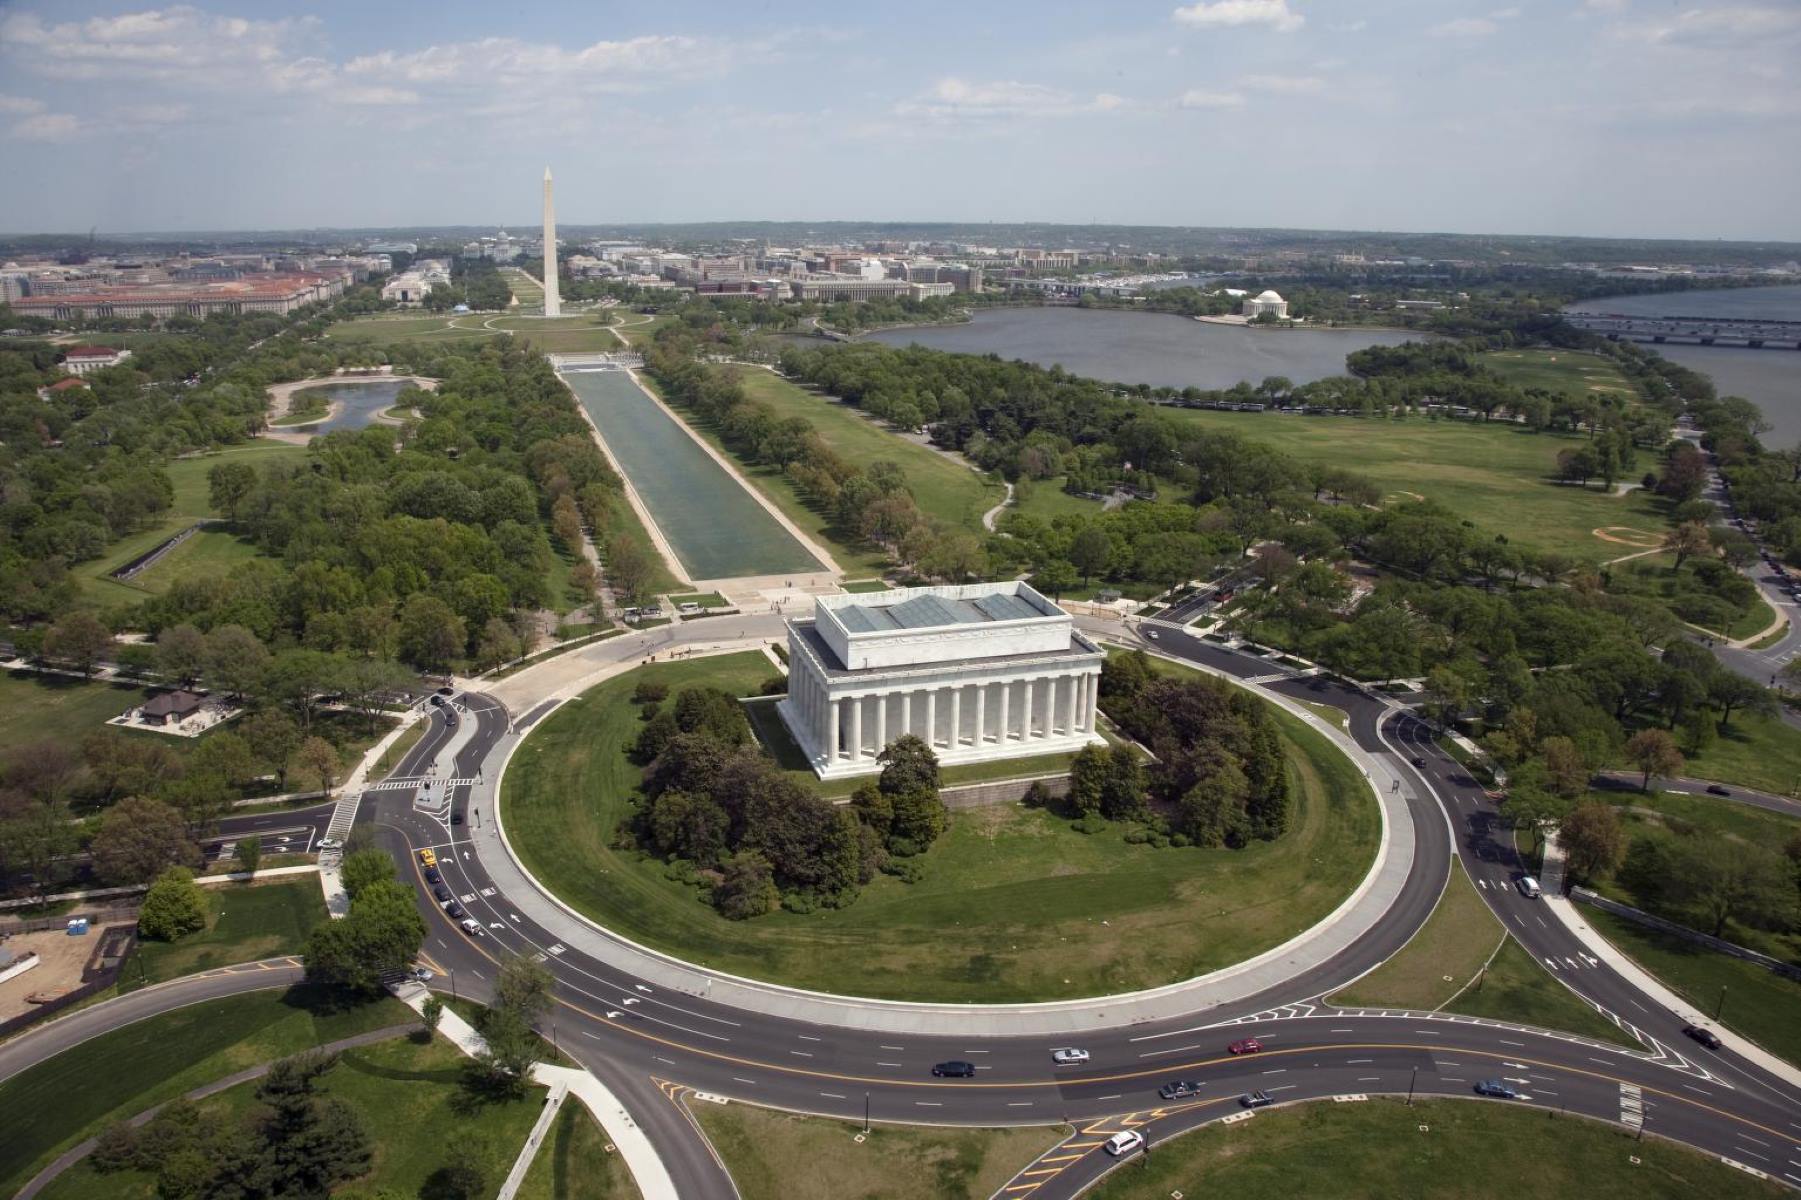 Top Hotels In Washington, DC With Stunning Views Of The White House And Lincoln Memorial